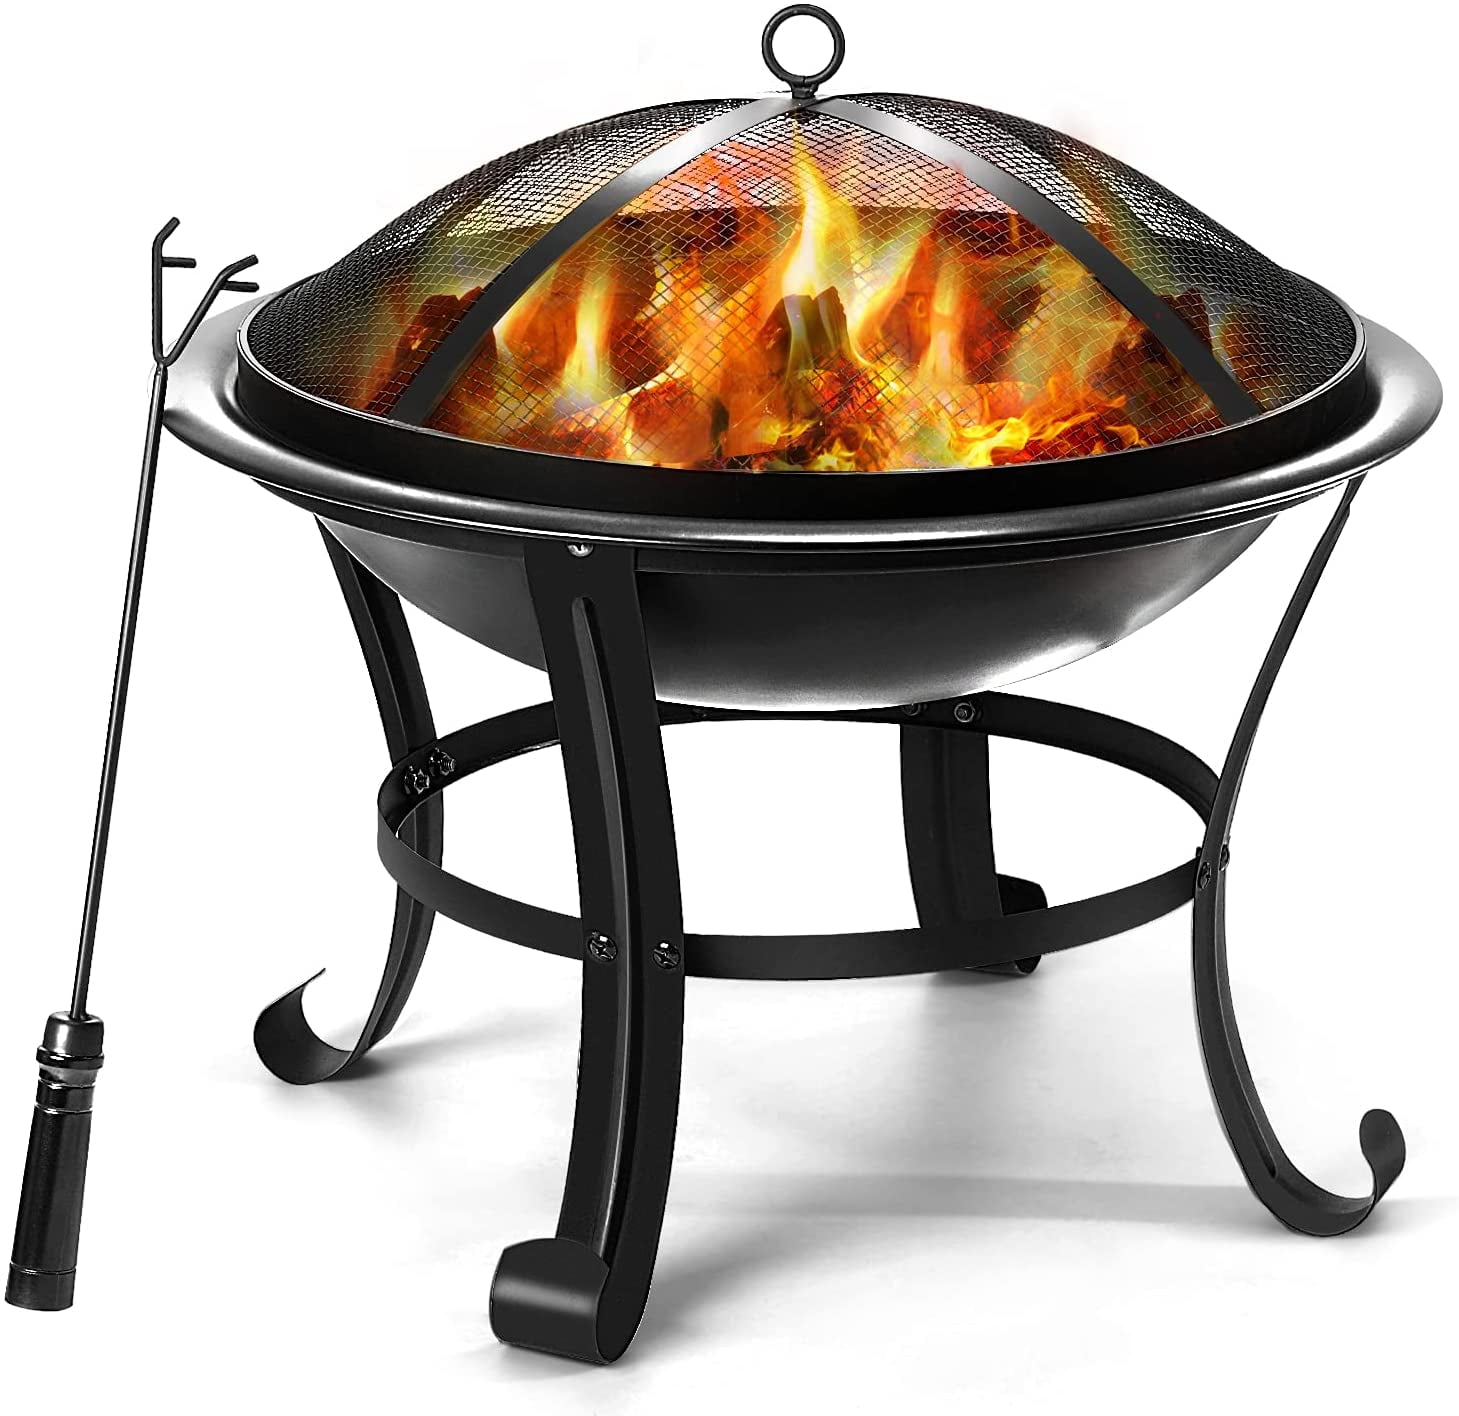 QOMOTOP Charcoal Grill Camping BBQ Grill Patio Backyard Cooking Portable Charcoal Grill 22.5 inch Barbecue Grill